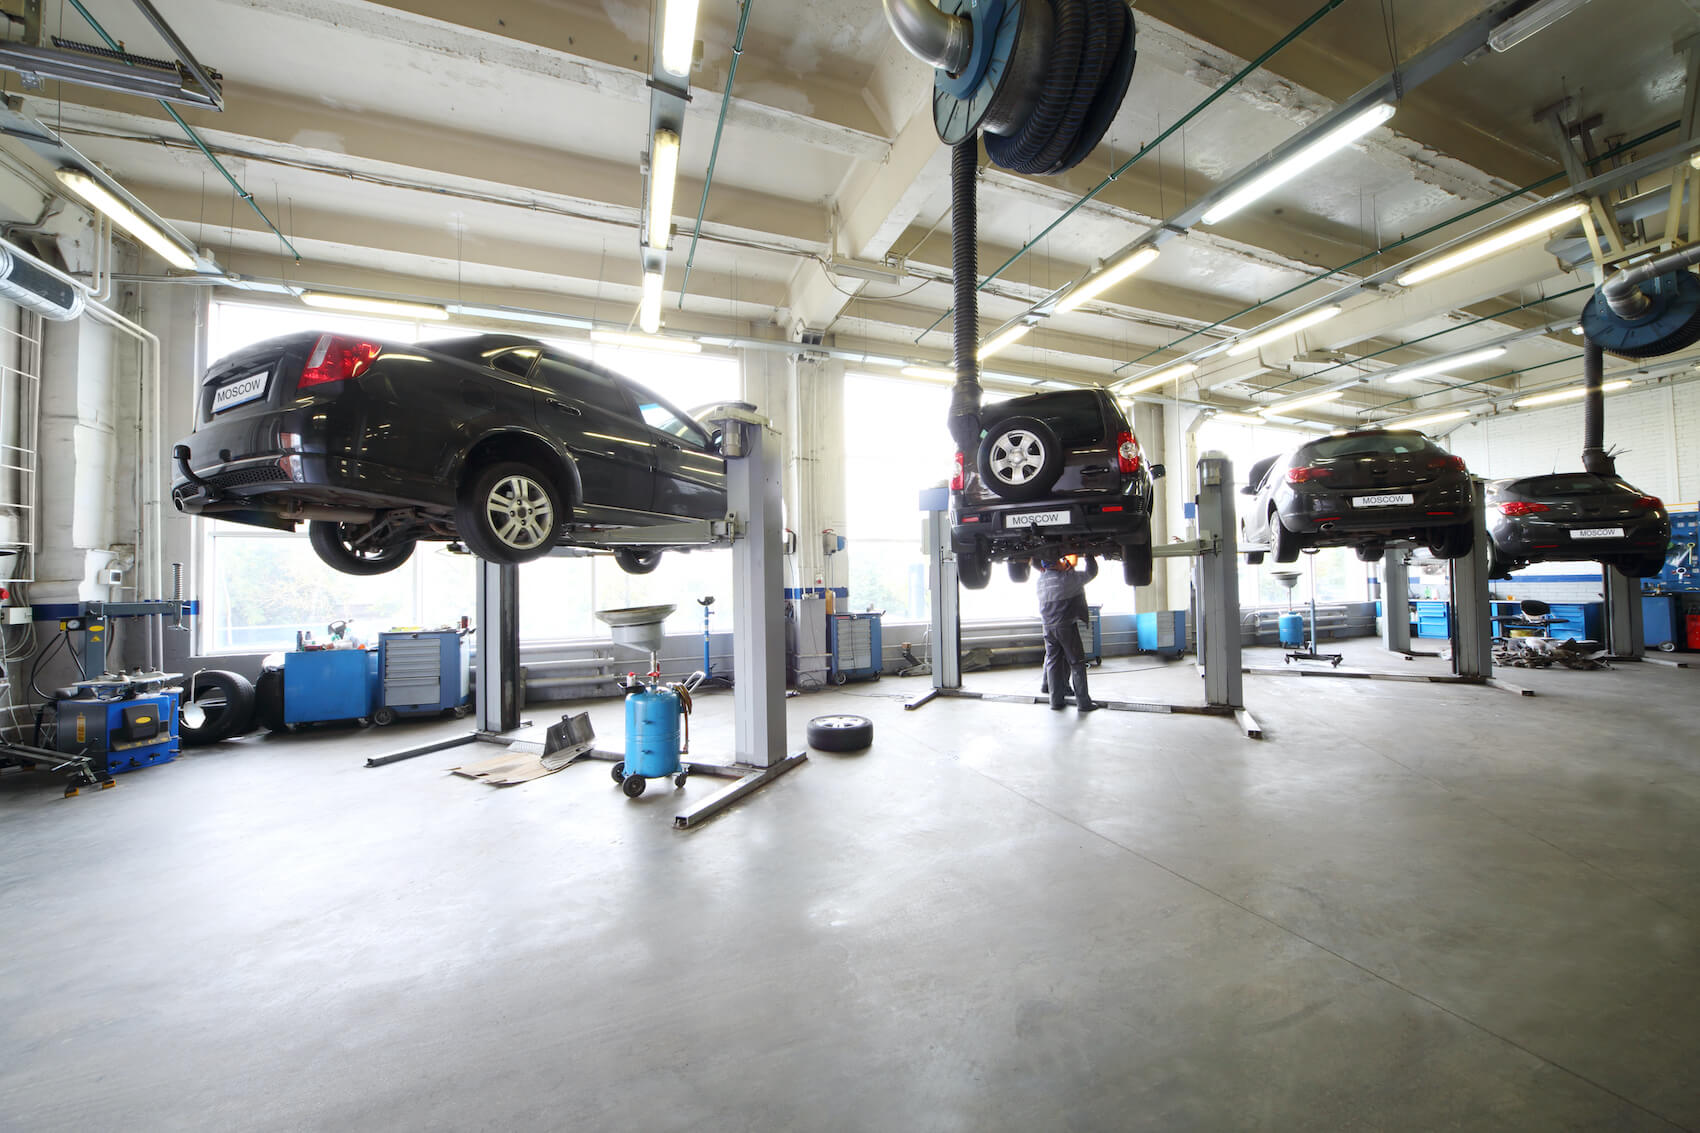 Cars lifted in service center